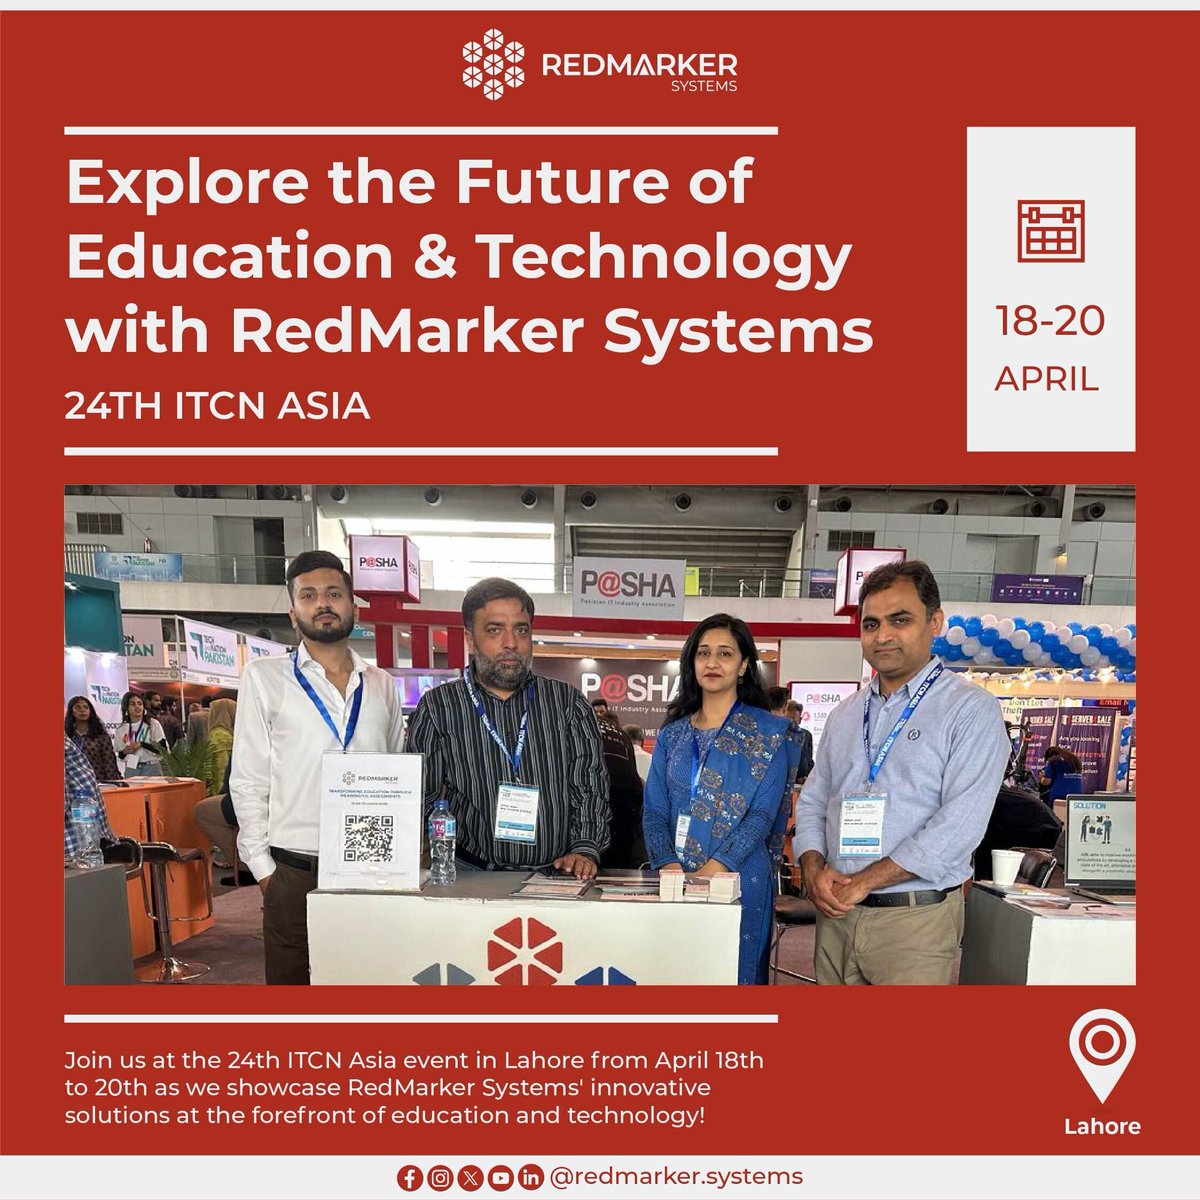 Join us at the 24th ITCN Asia event in Lahore from April 18th to 20th as we showcase RedMarker Systems' innovative solutions at the forefront of education and technology!

#ITCNAsia #Technology #Education #RedMarkerSystems